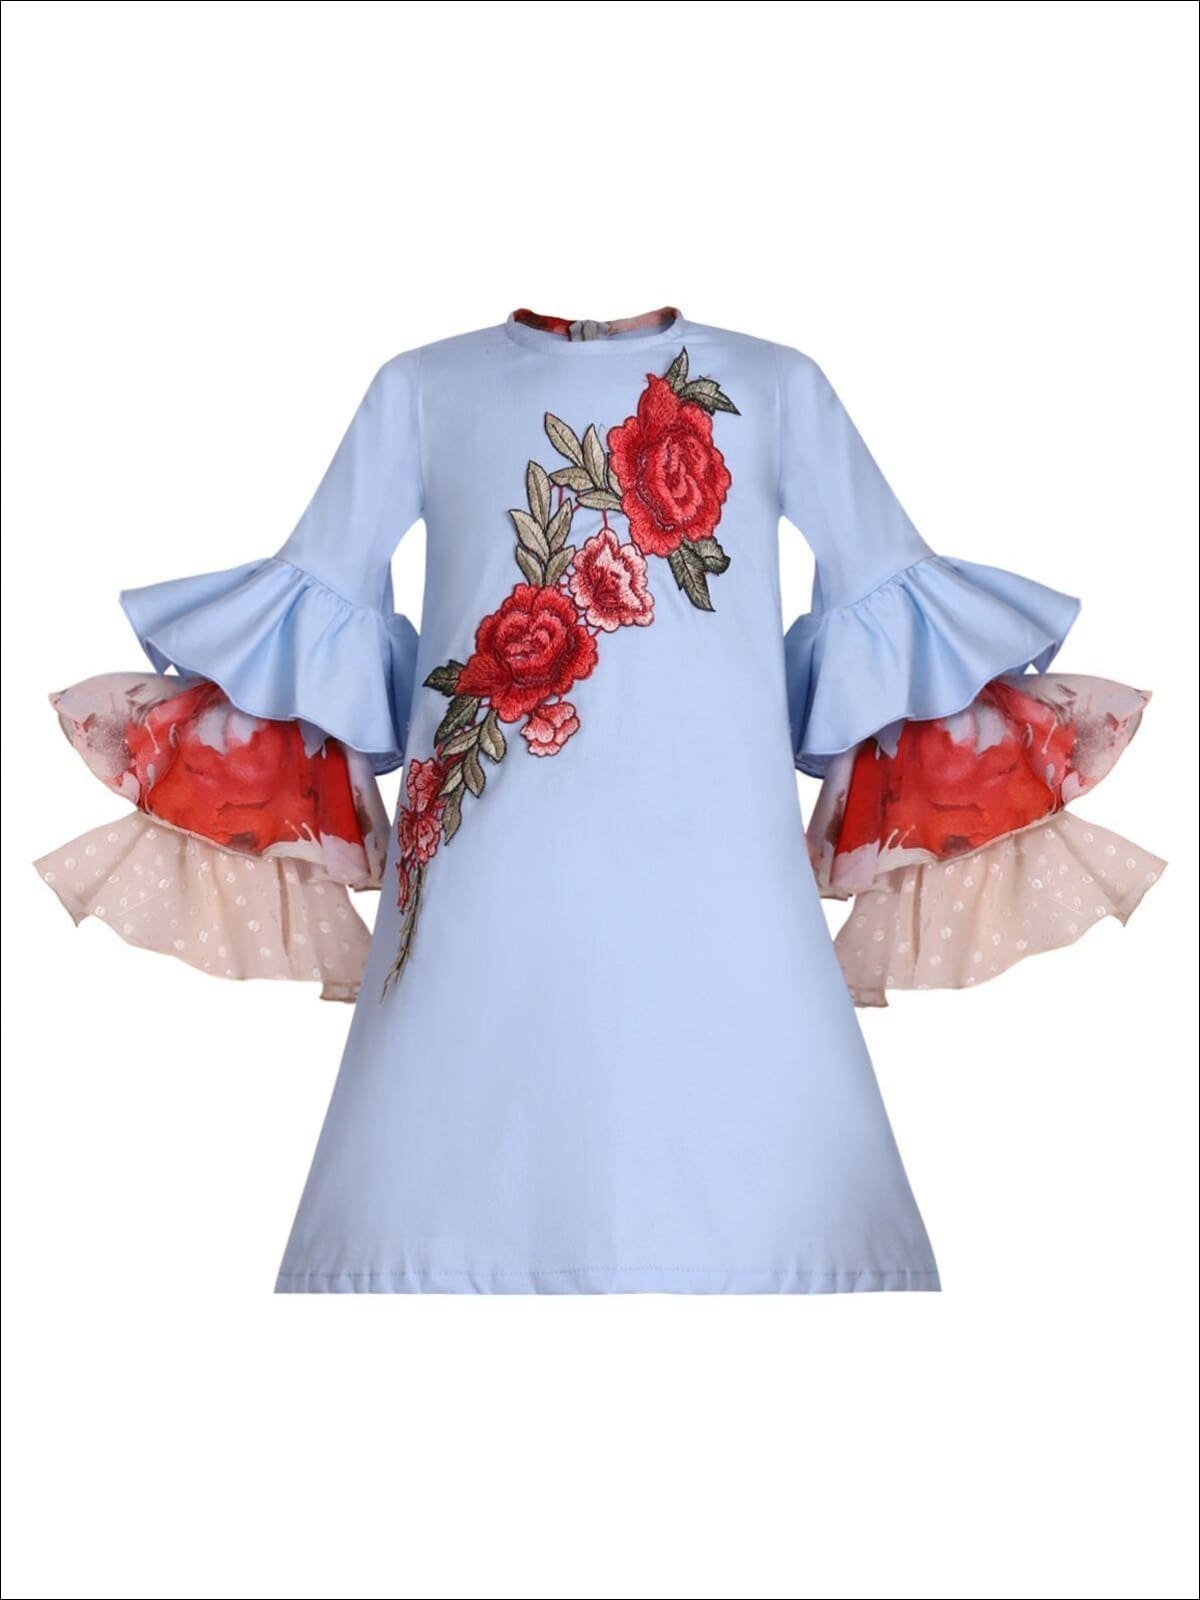 Girls A-Line Ruffled Long Sleeve Dress with Rose Embroidery - Blue / 2T/3T - Girls Fall Casual Dress